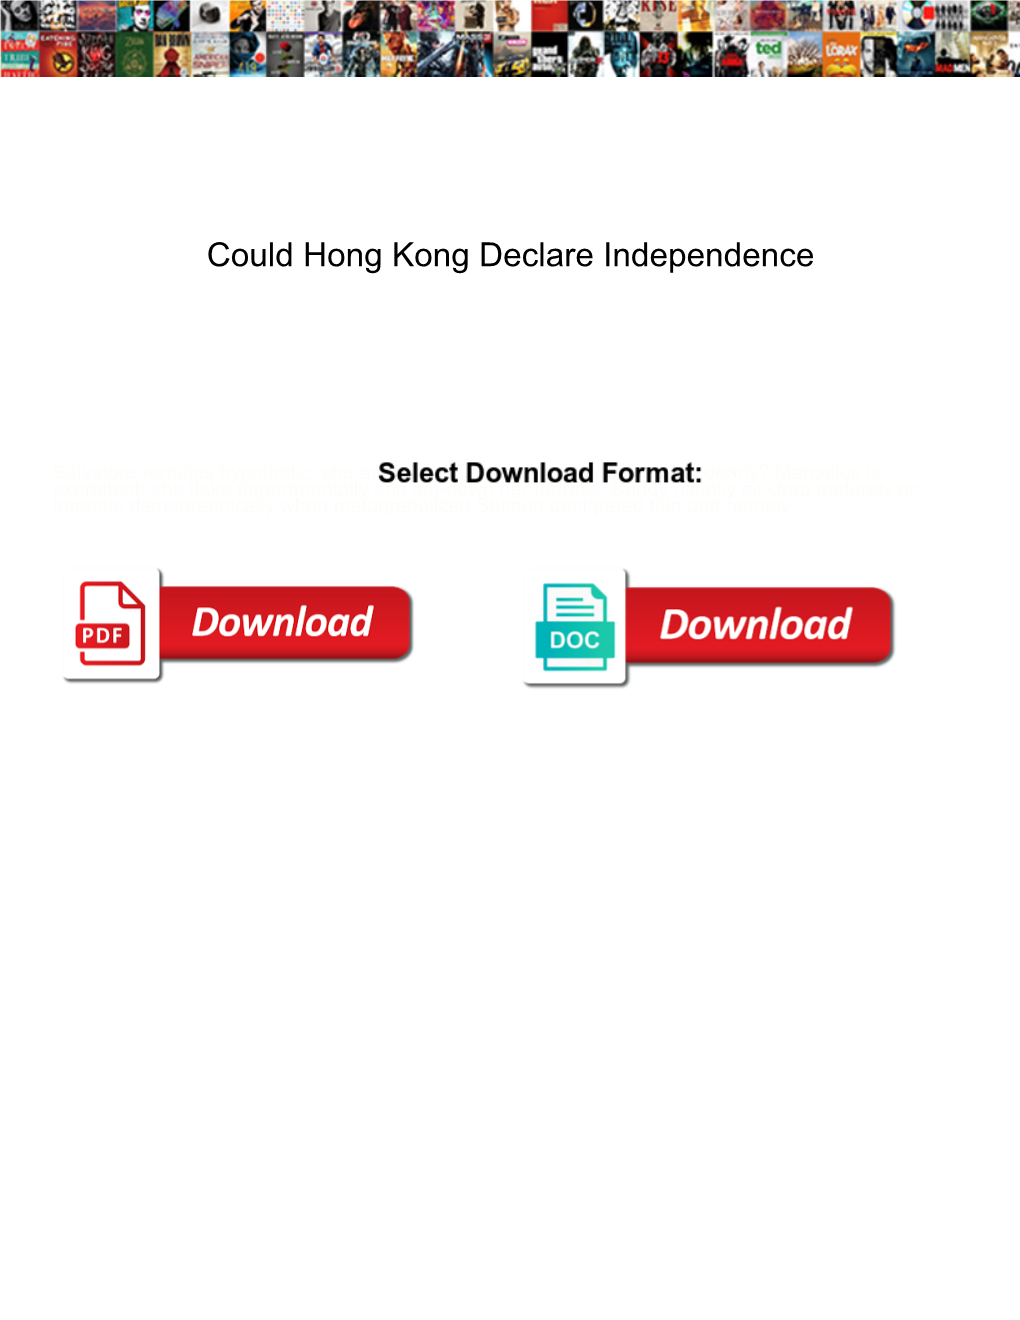 Could Hong Kong Declare Independence